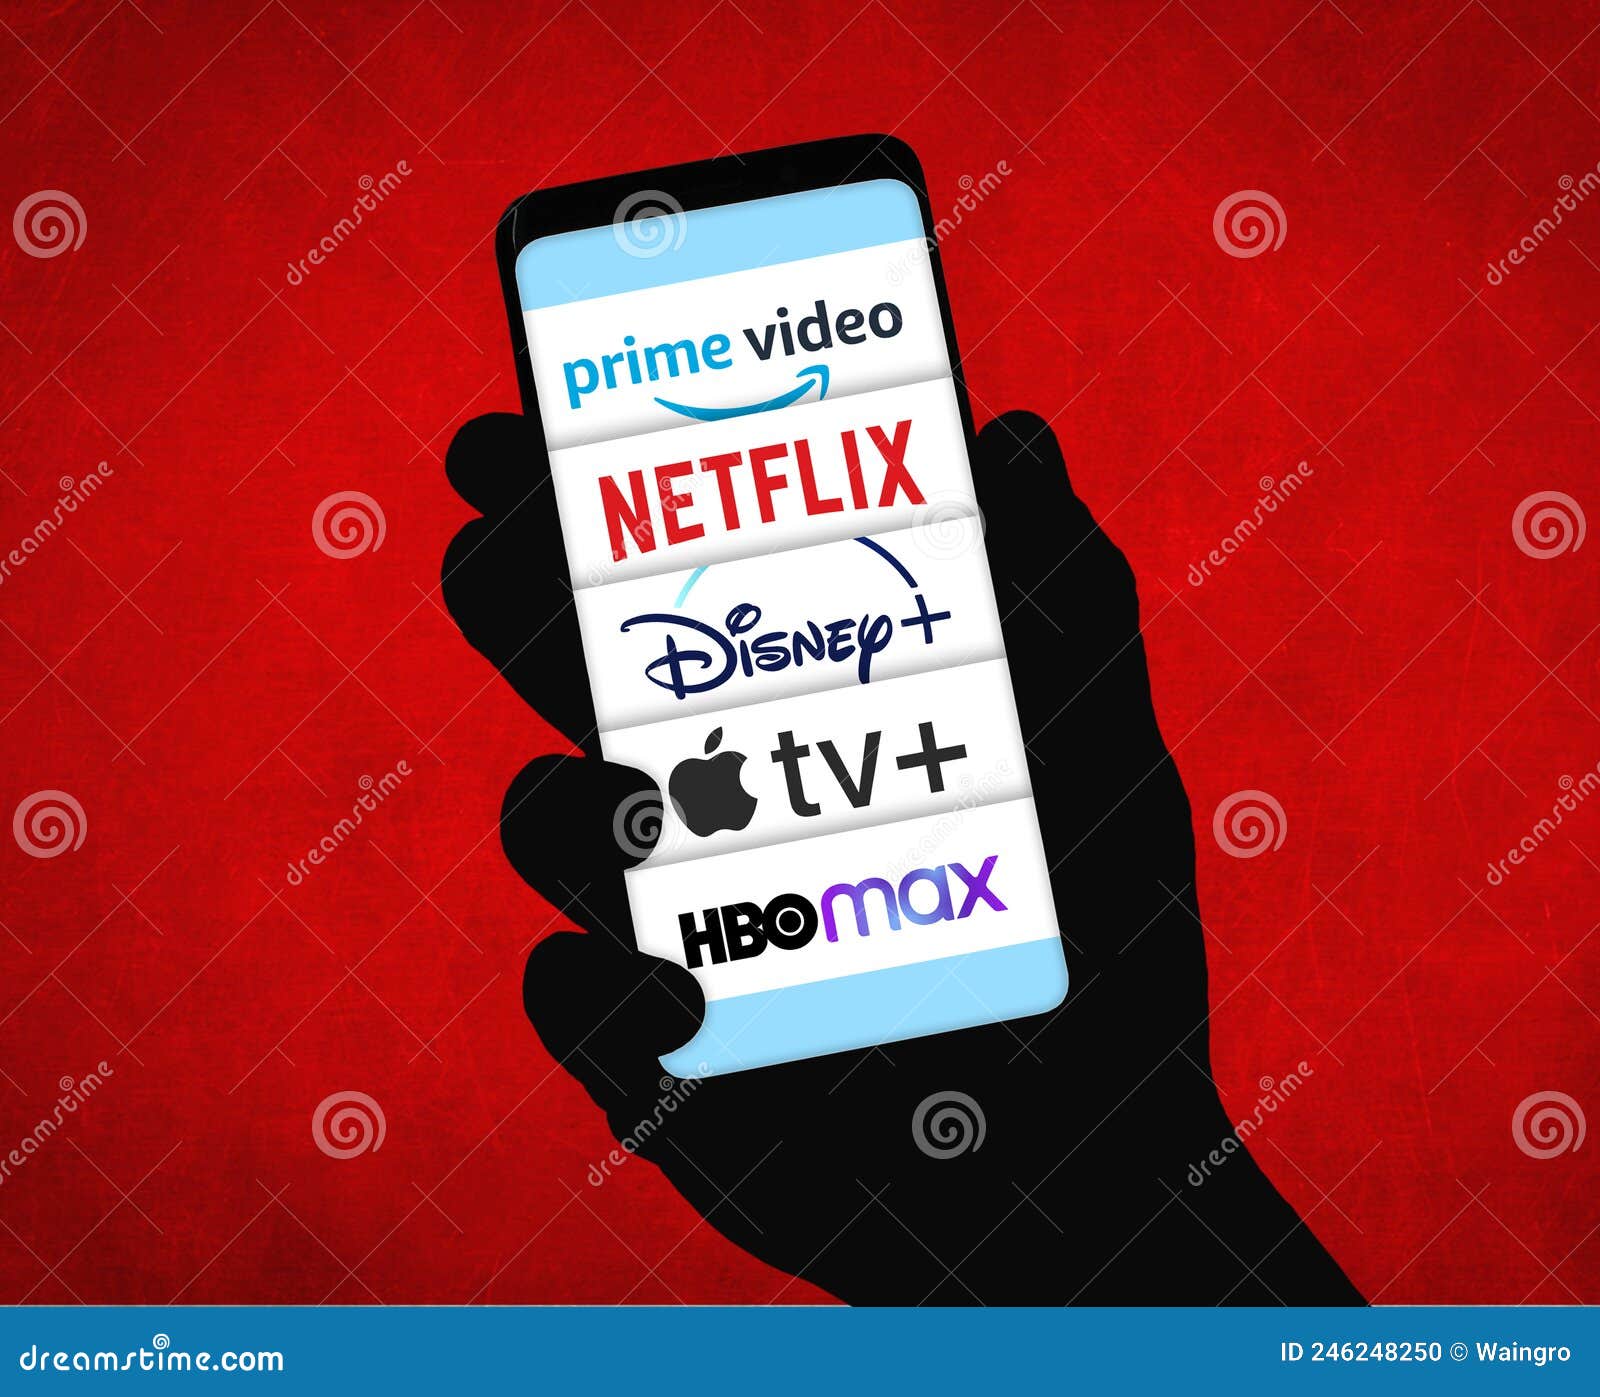 Video on Demand - Streaming Services Editorial Image